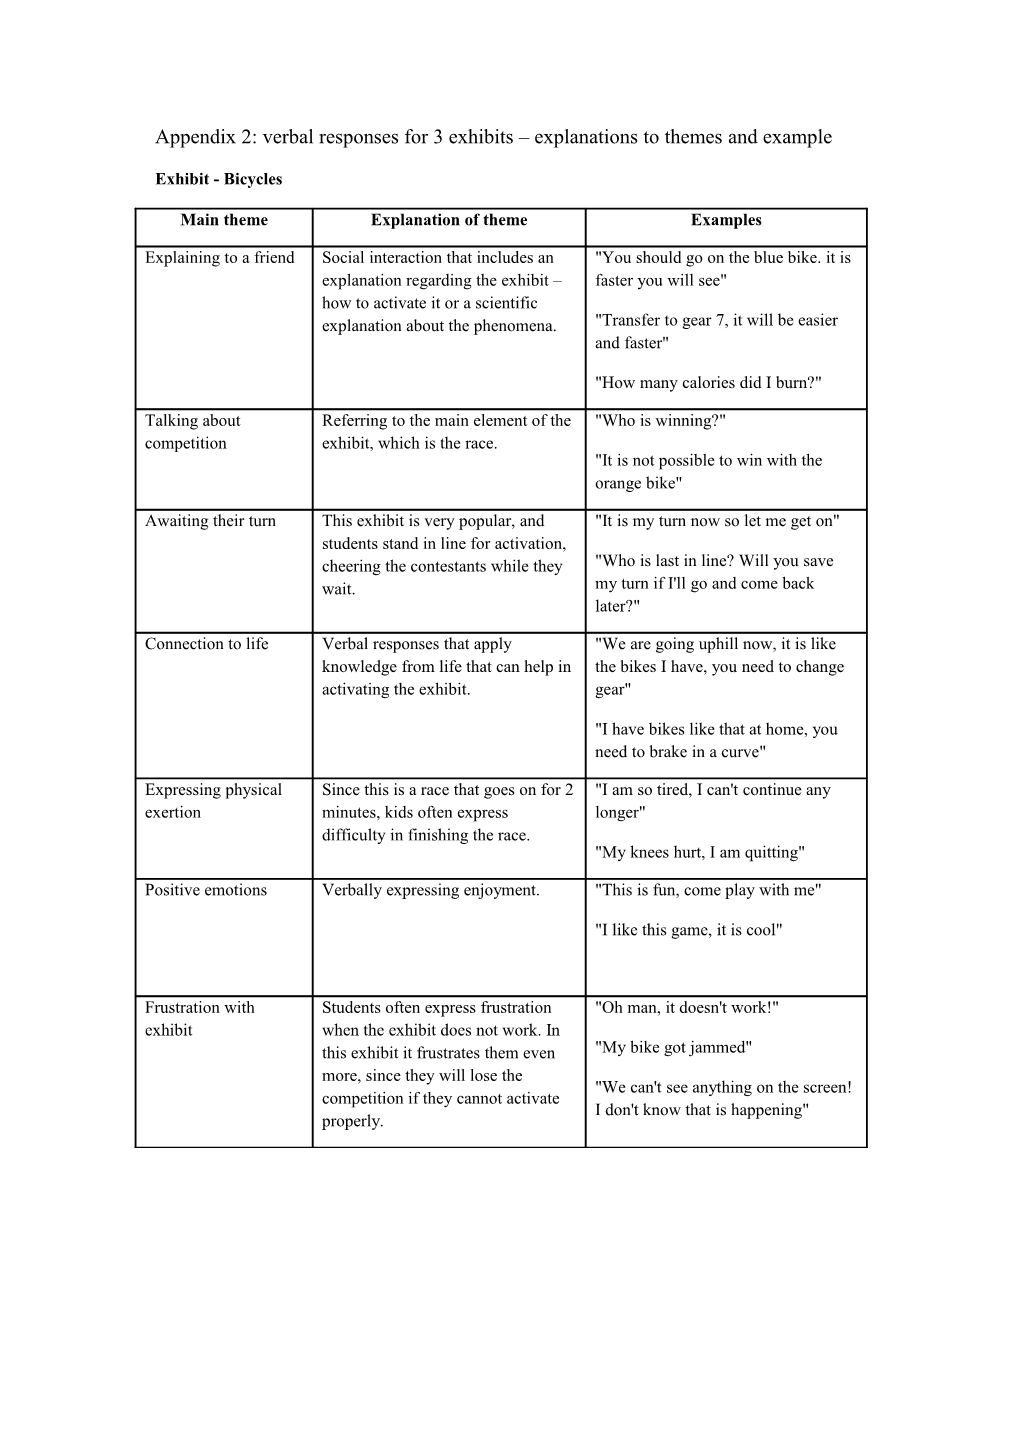 Appendix 2: Verbal Responses for 3 Exhibits Explanations to Themes and Example